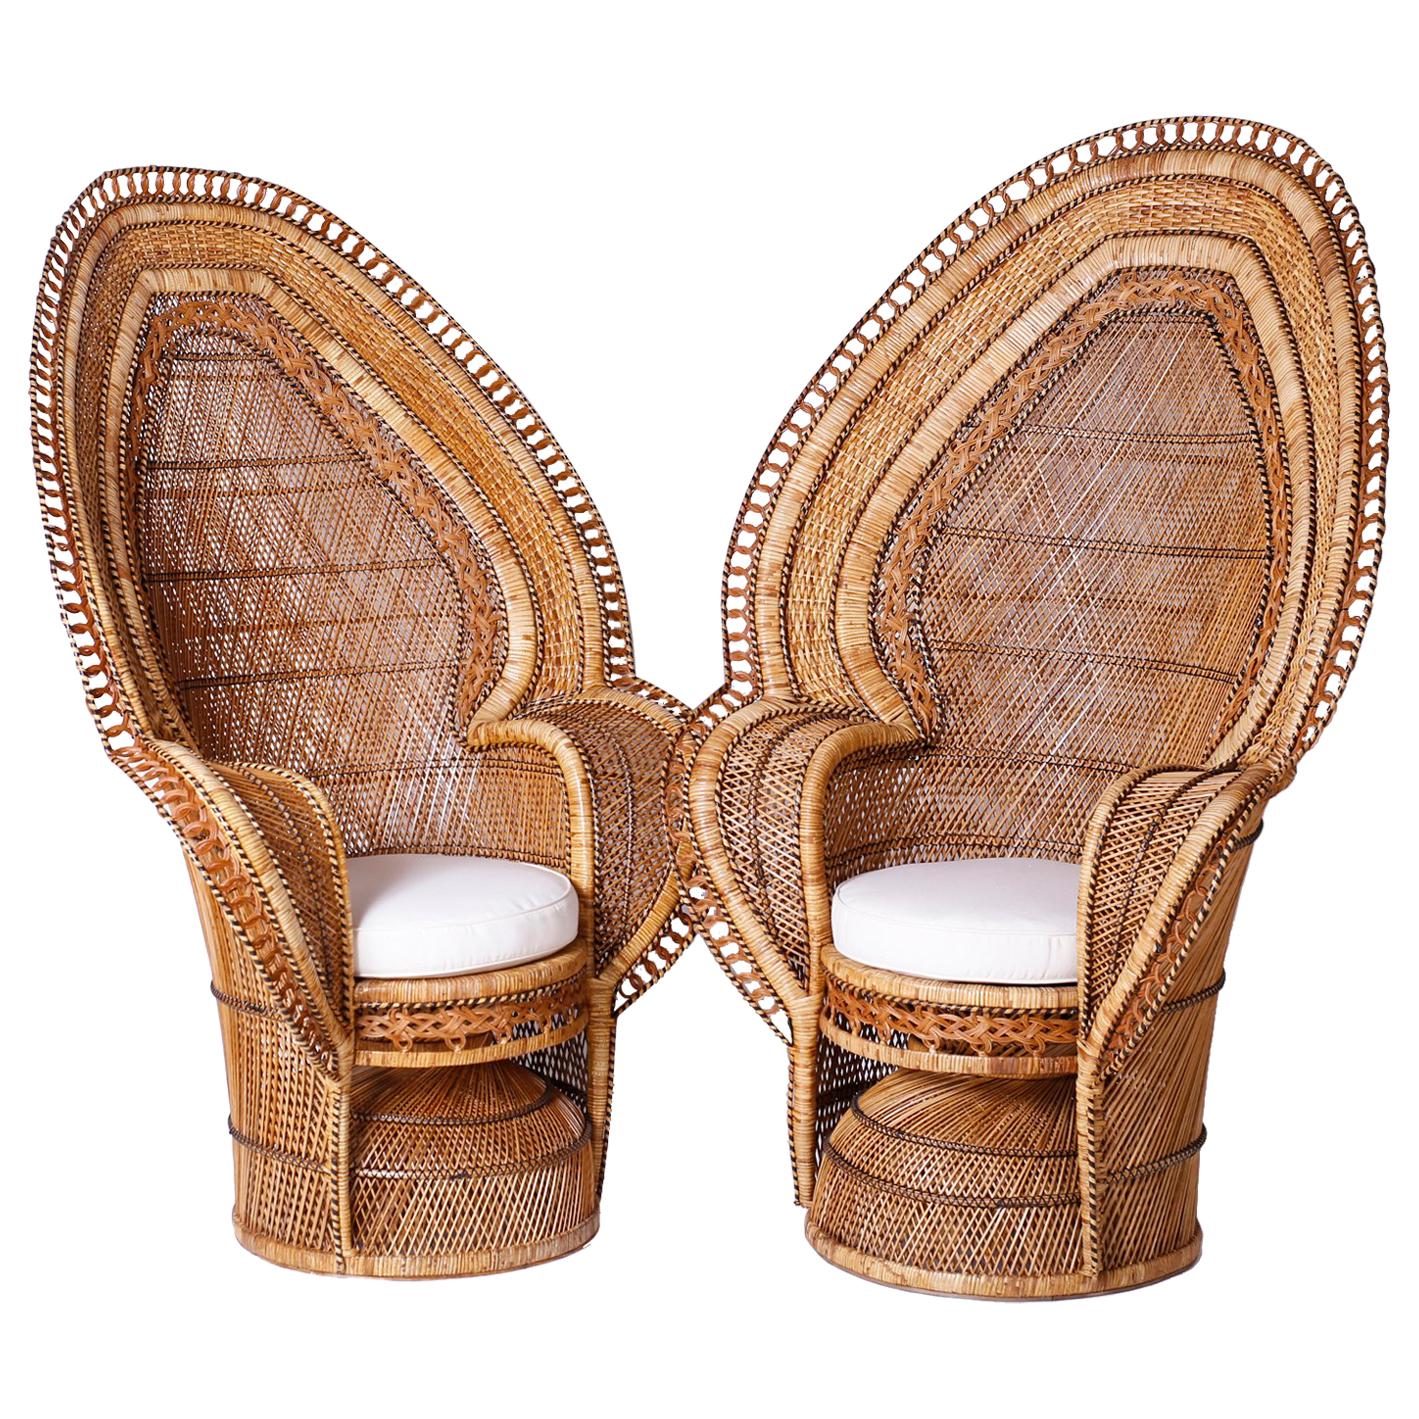 Pair of Exceptional Peacock Chairs